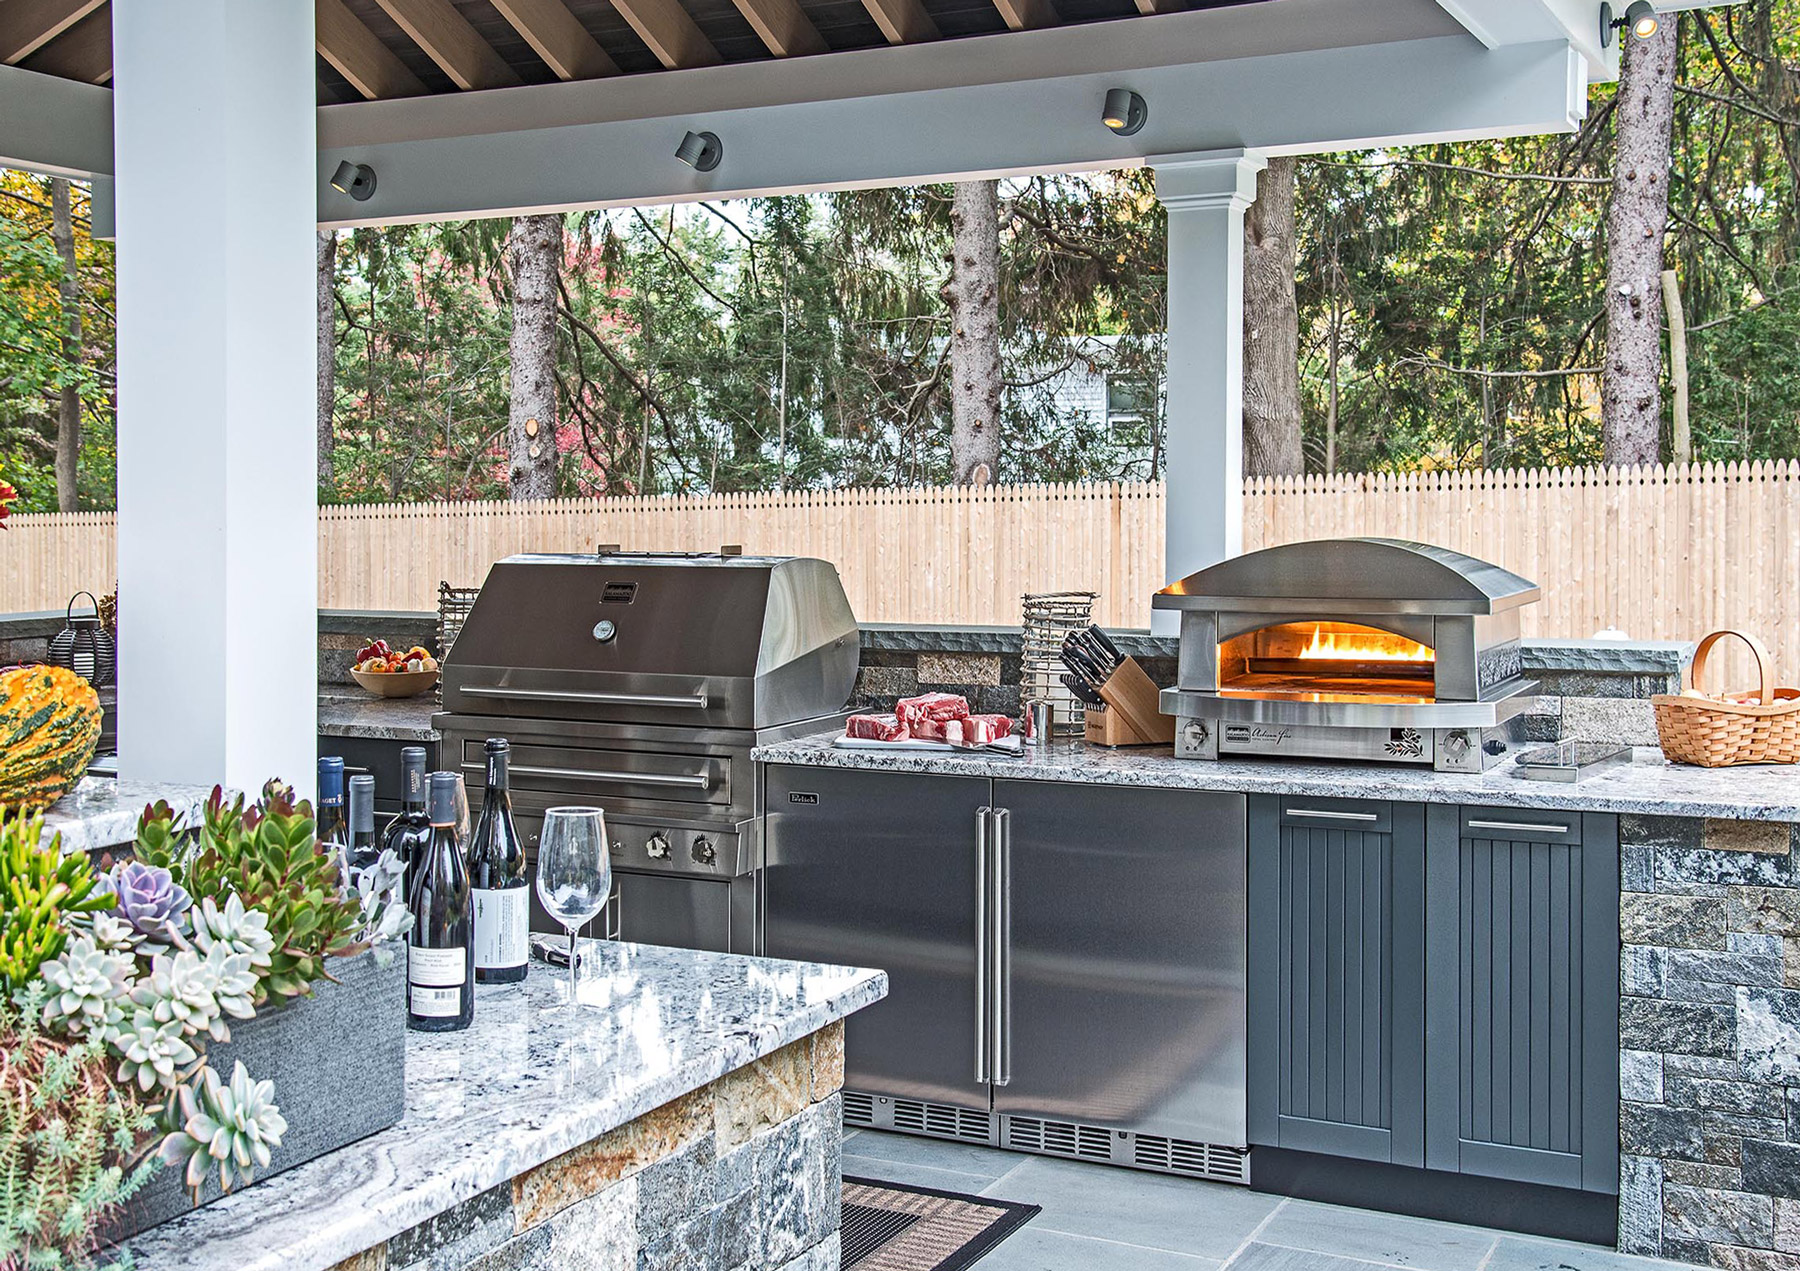 Custom Grill Island with Pizza Oven